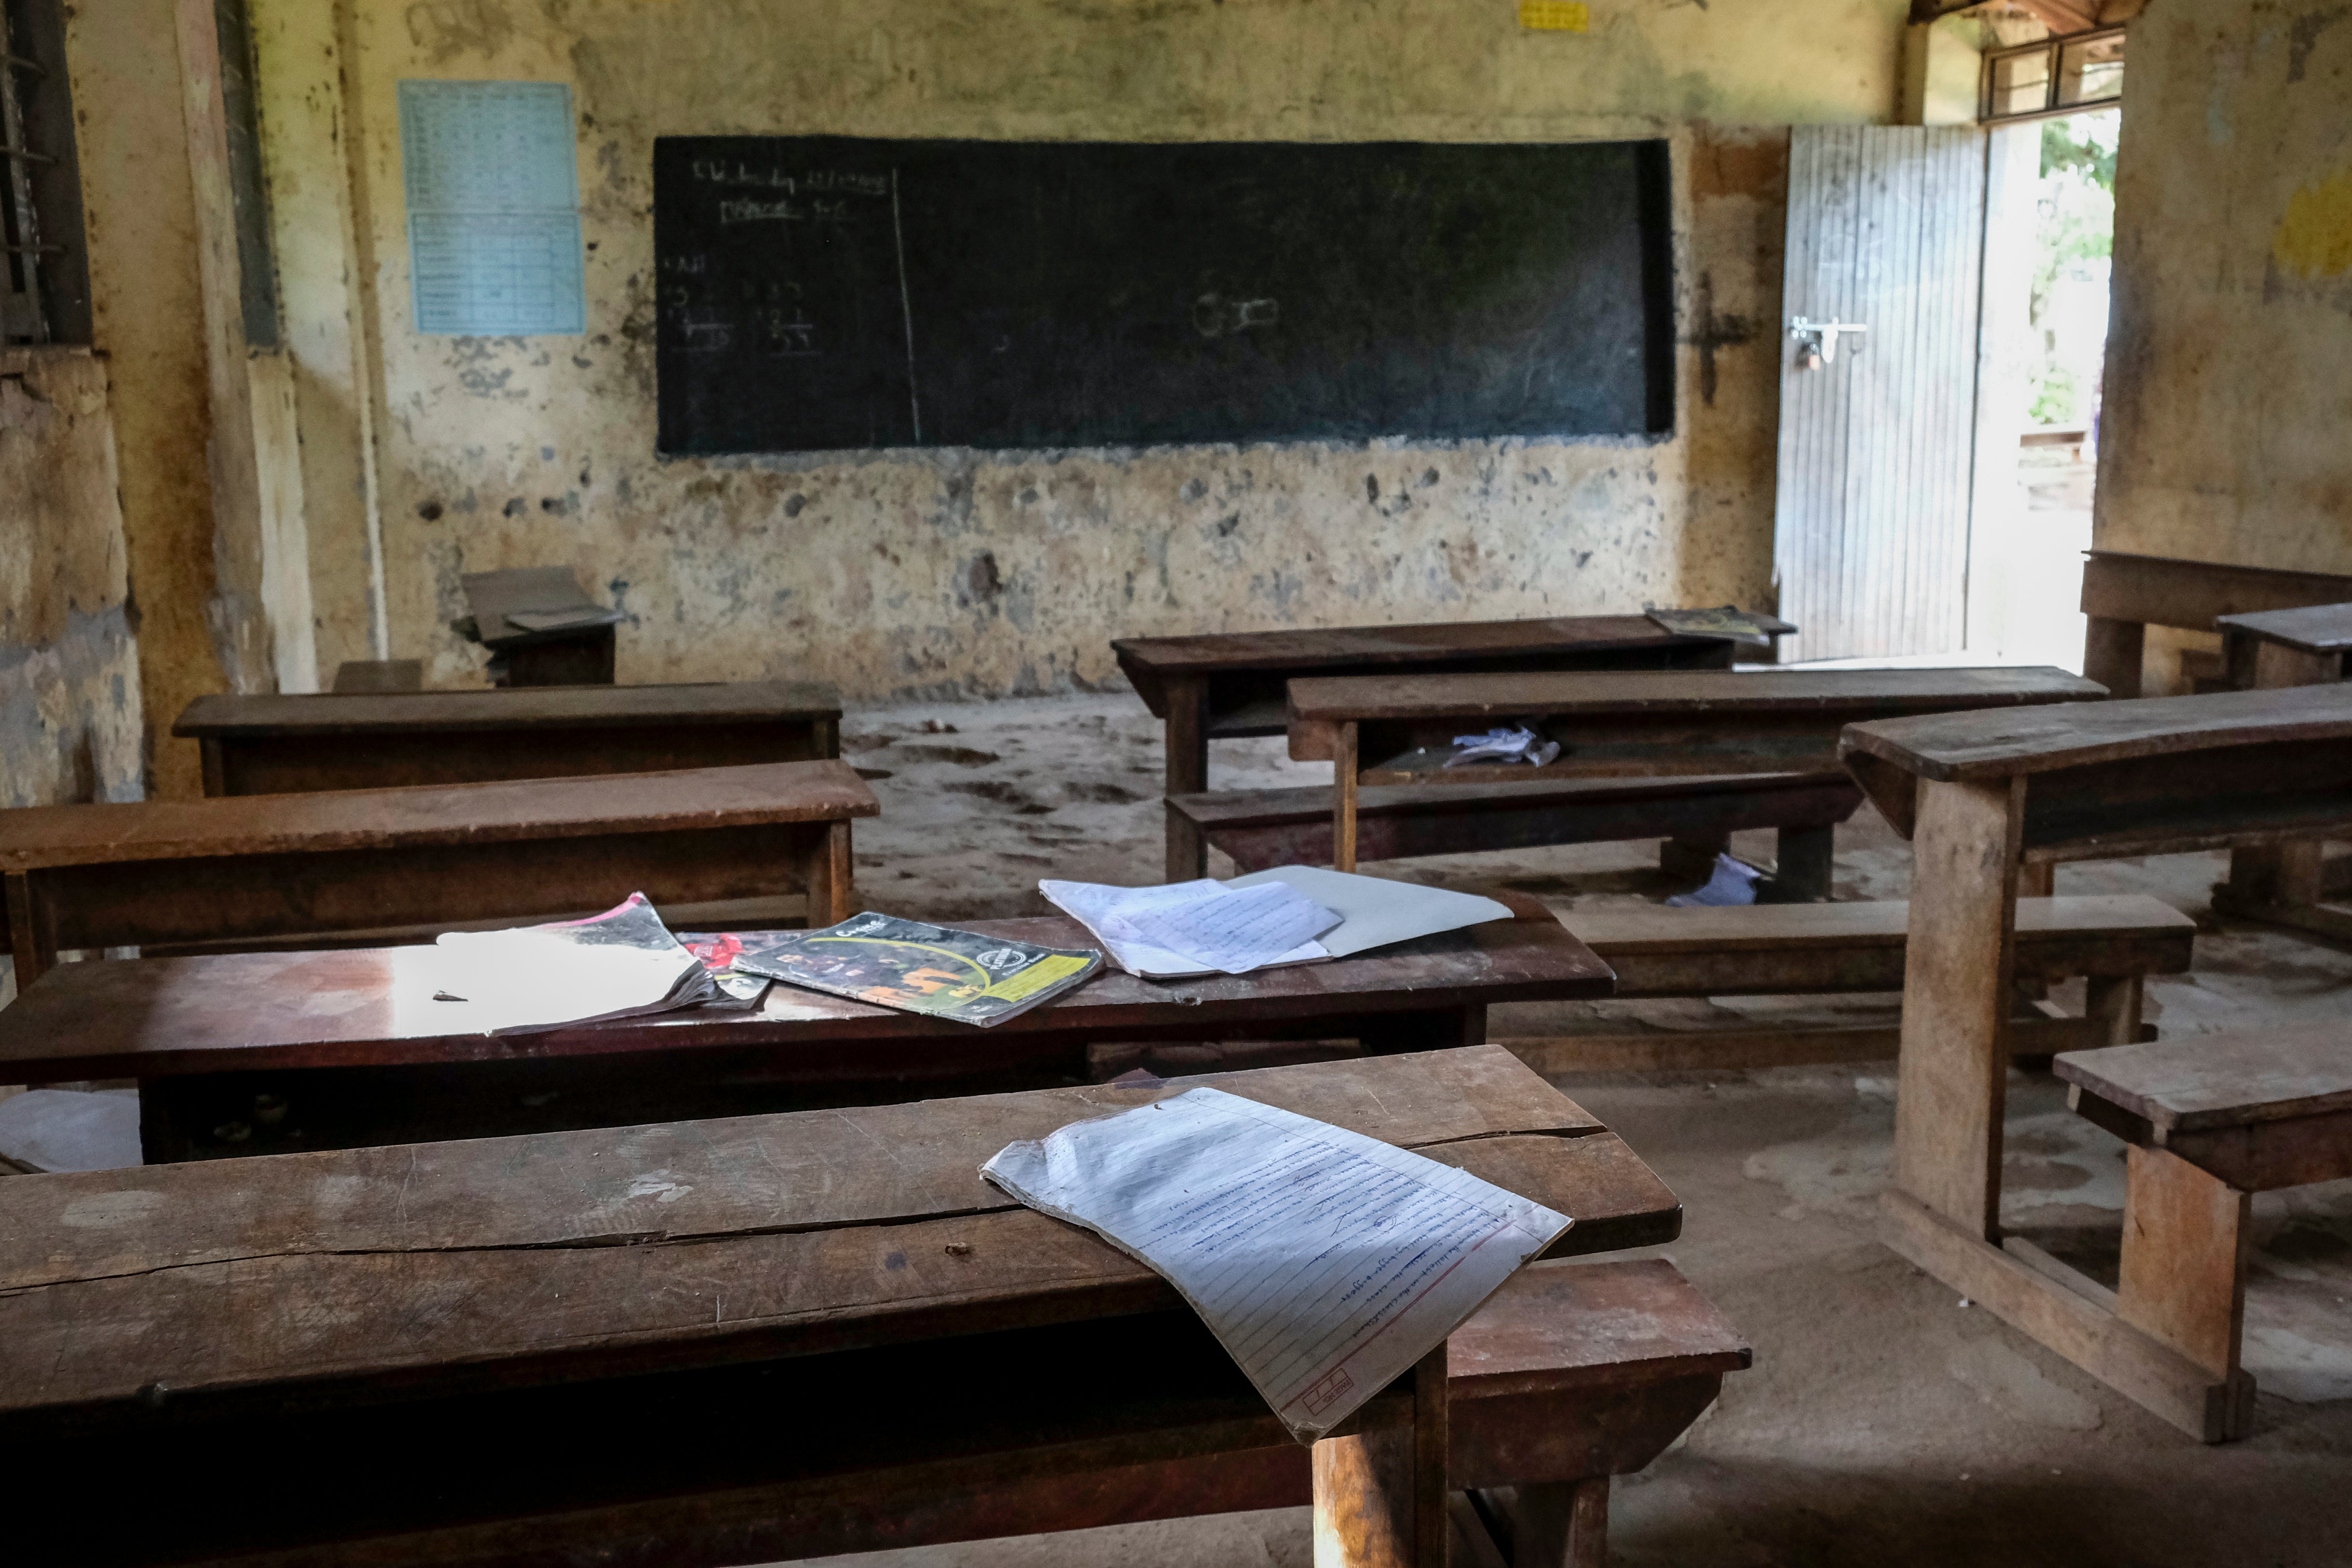 Pupils' books sit abandoned in a classroom at Madudu Catholic Church school, where many students have stayed away due to the risk of Ebola, in Madudu